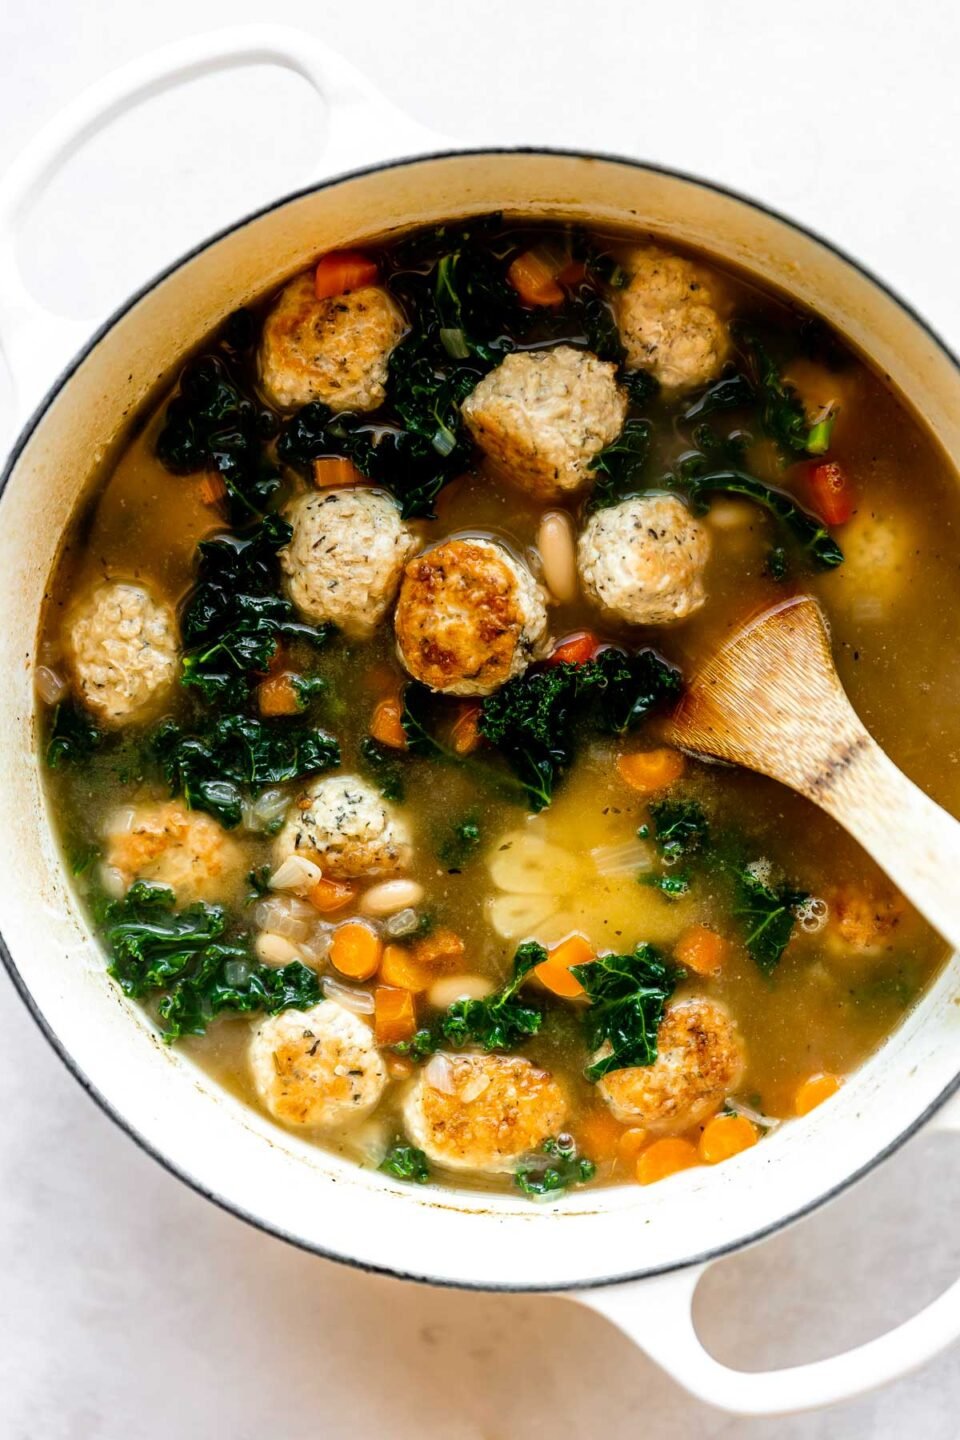 Italian wedding soup with meatballs simmers inside of a large white pot. The pot sits atop a creamy white textured surface.  A wooden turner rests inside of the pot for stirring.